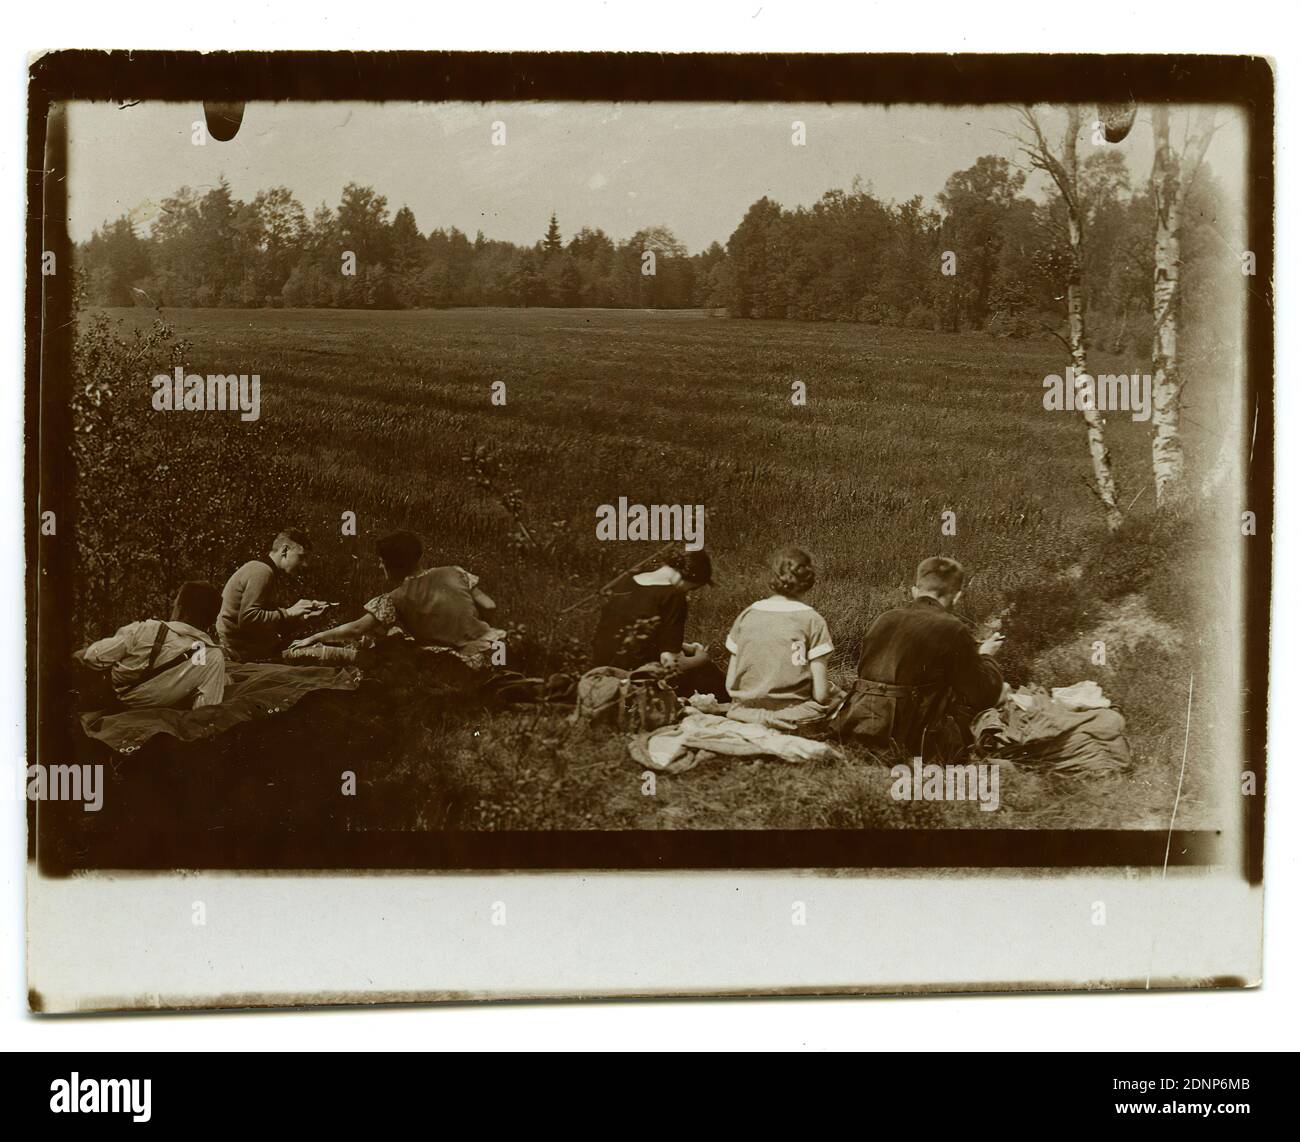 Heinrich Hamann, Atelier J. Hamann, Johann Hinrich W. Hamann, rest at the edge of the field, silver gelatin paper, black and white positive process, Total: Height: 6.90 cm; Width: 9.10 cm, reporting photography, recreation, relaxation Stock Photo